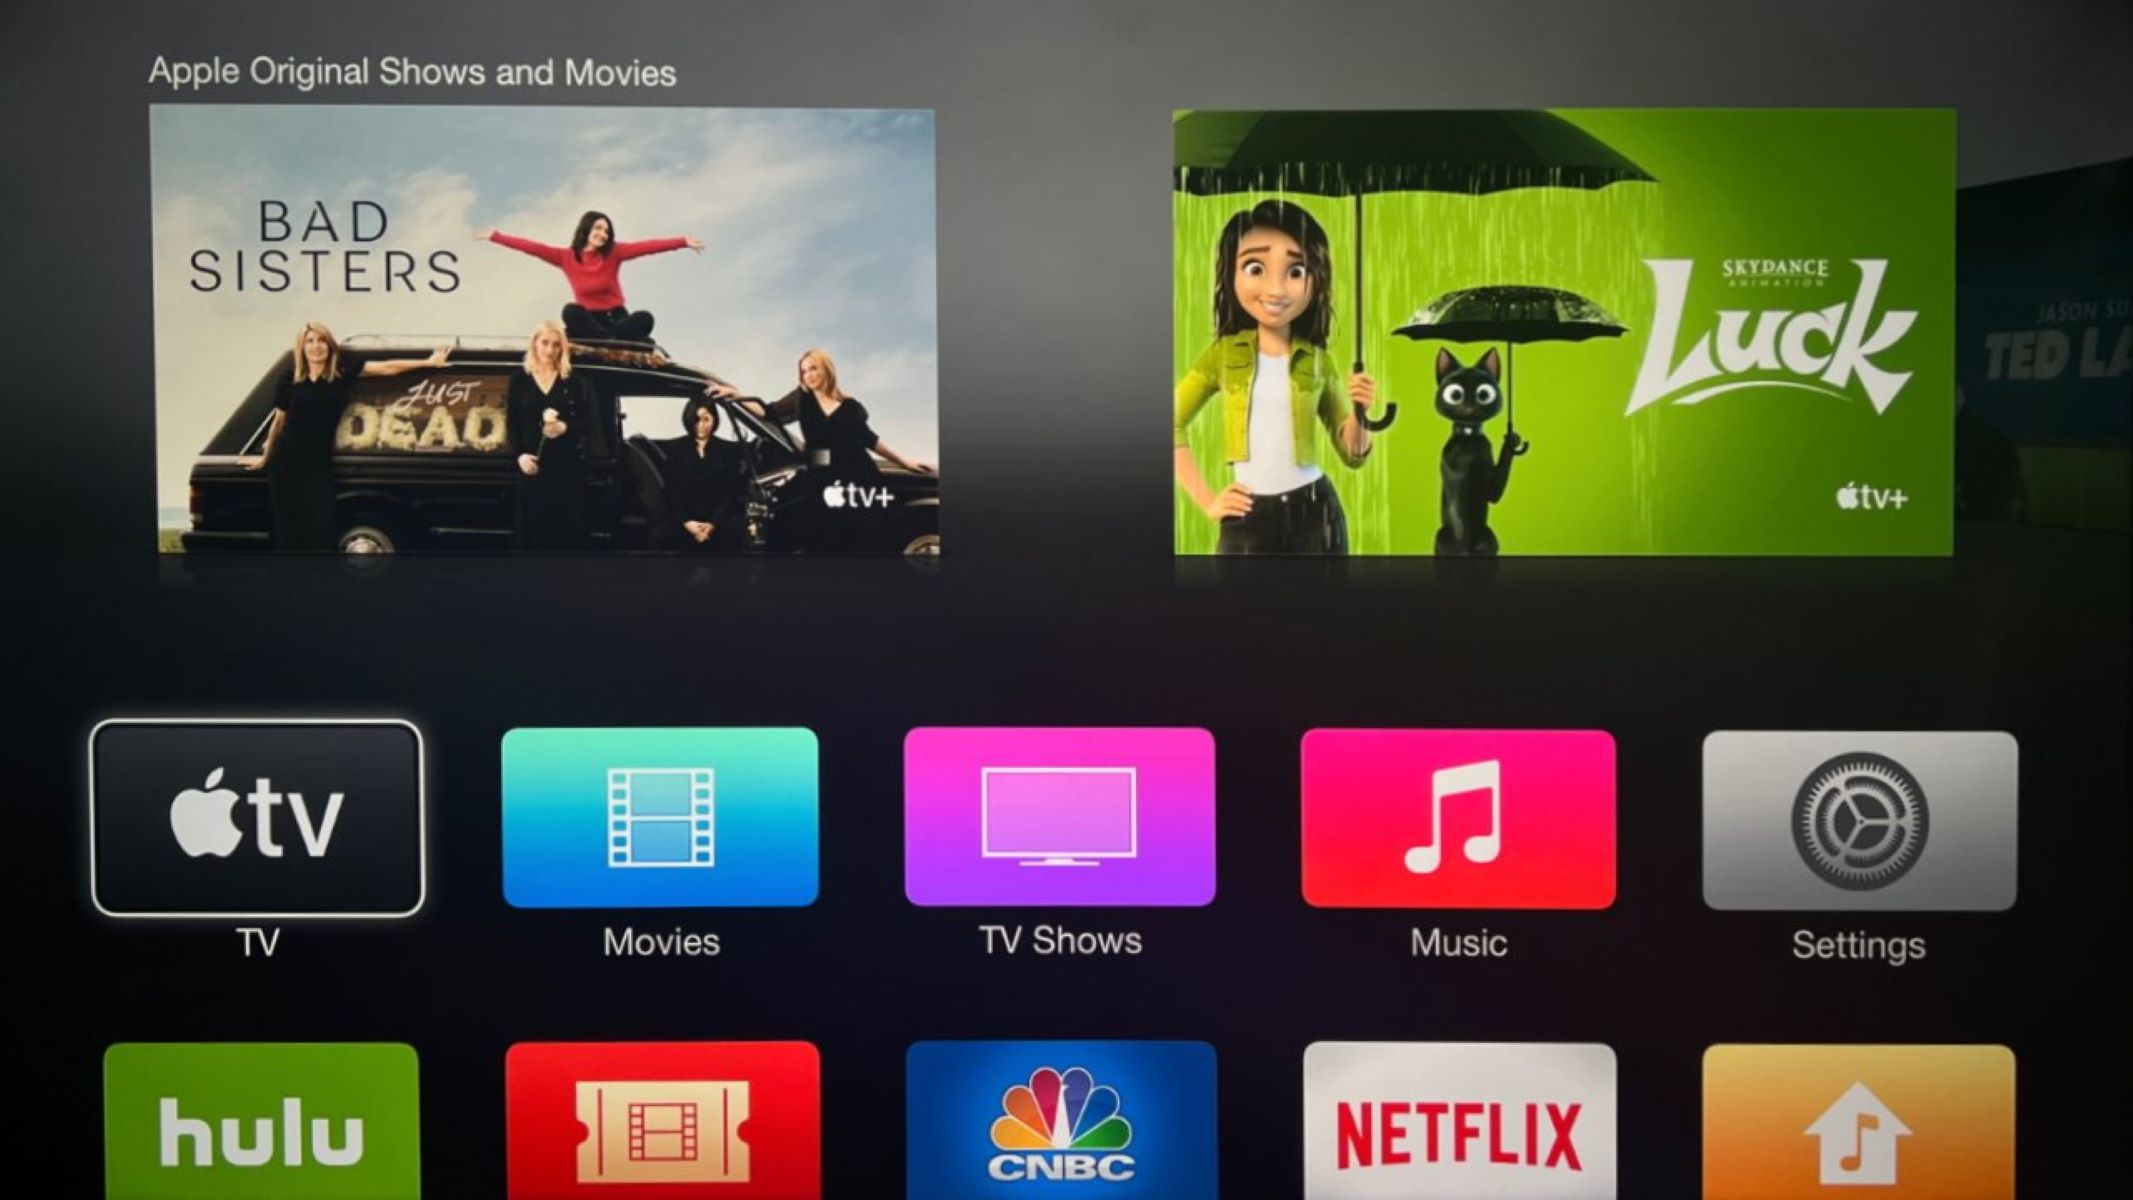 How To Download An App On Apple TV